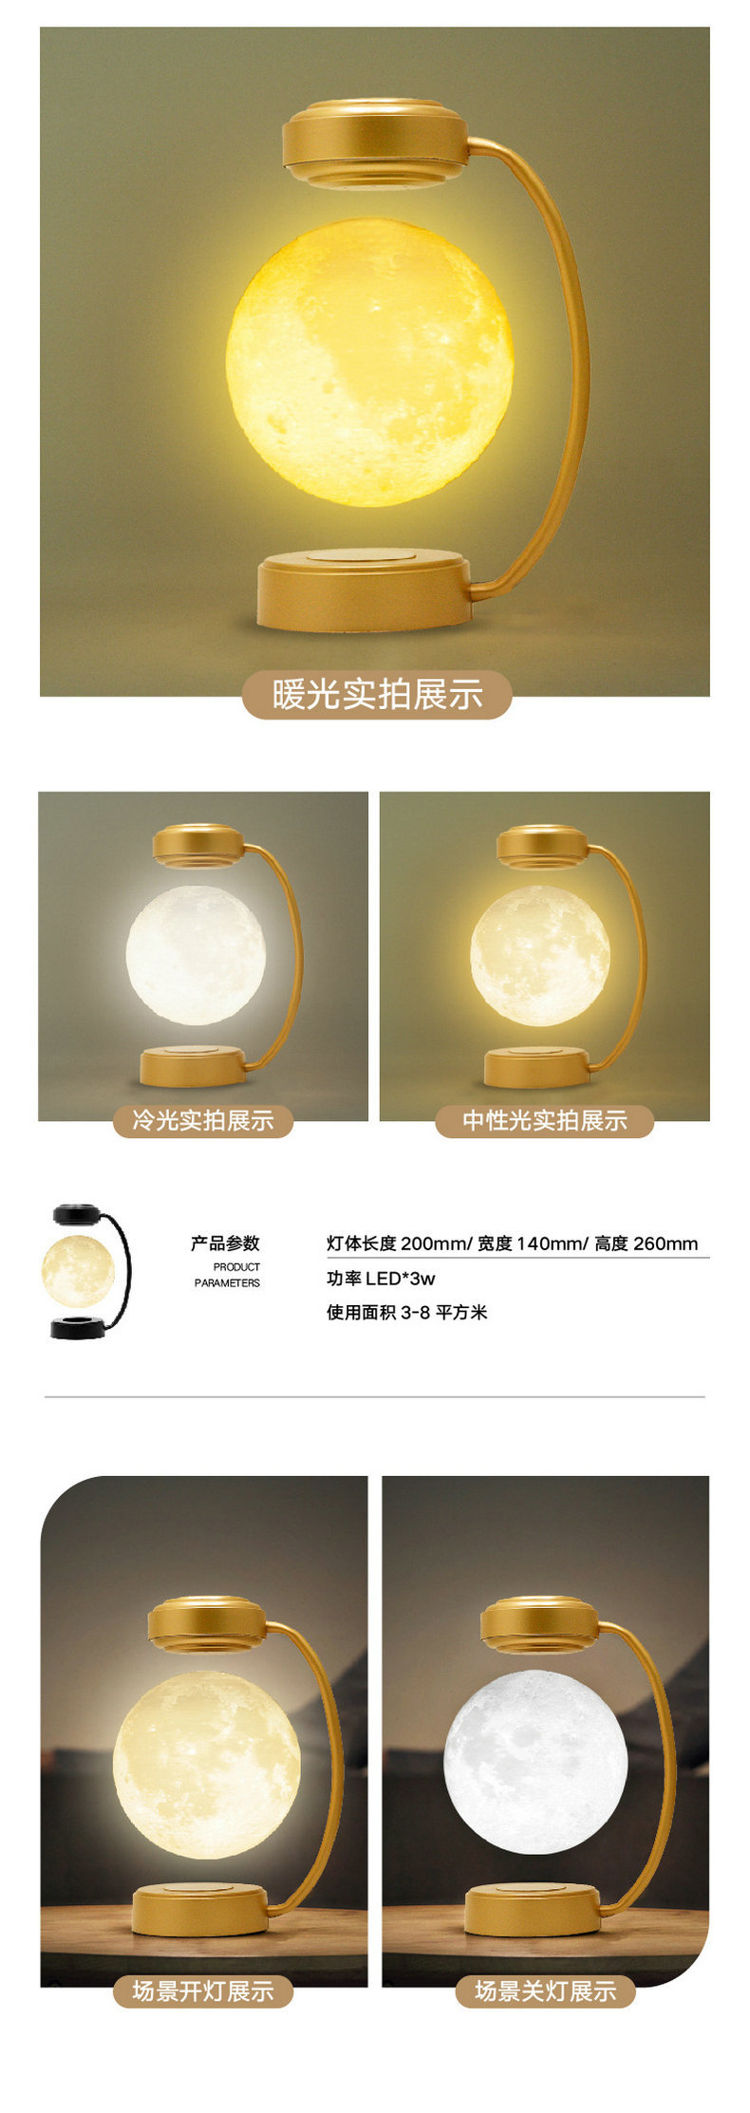 ZZB15138 suspended moon lamp china factory (8)